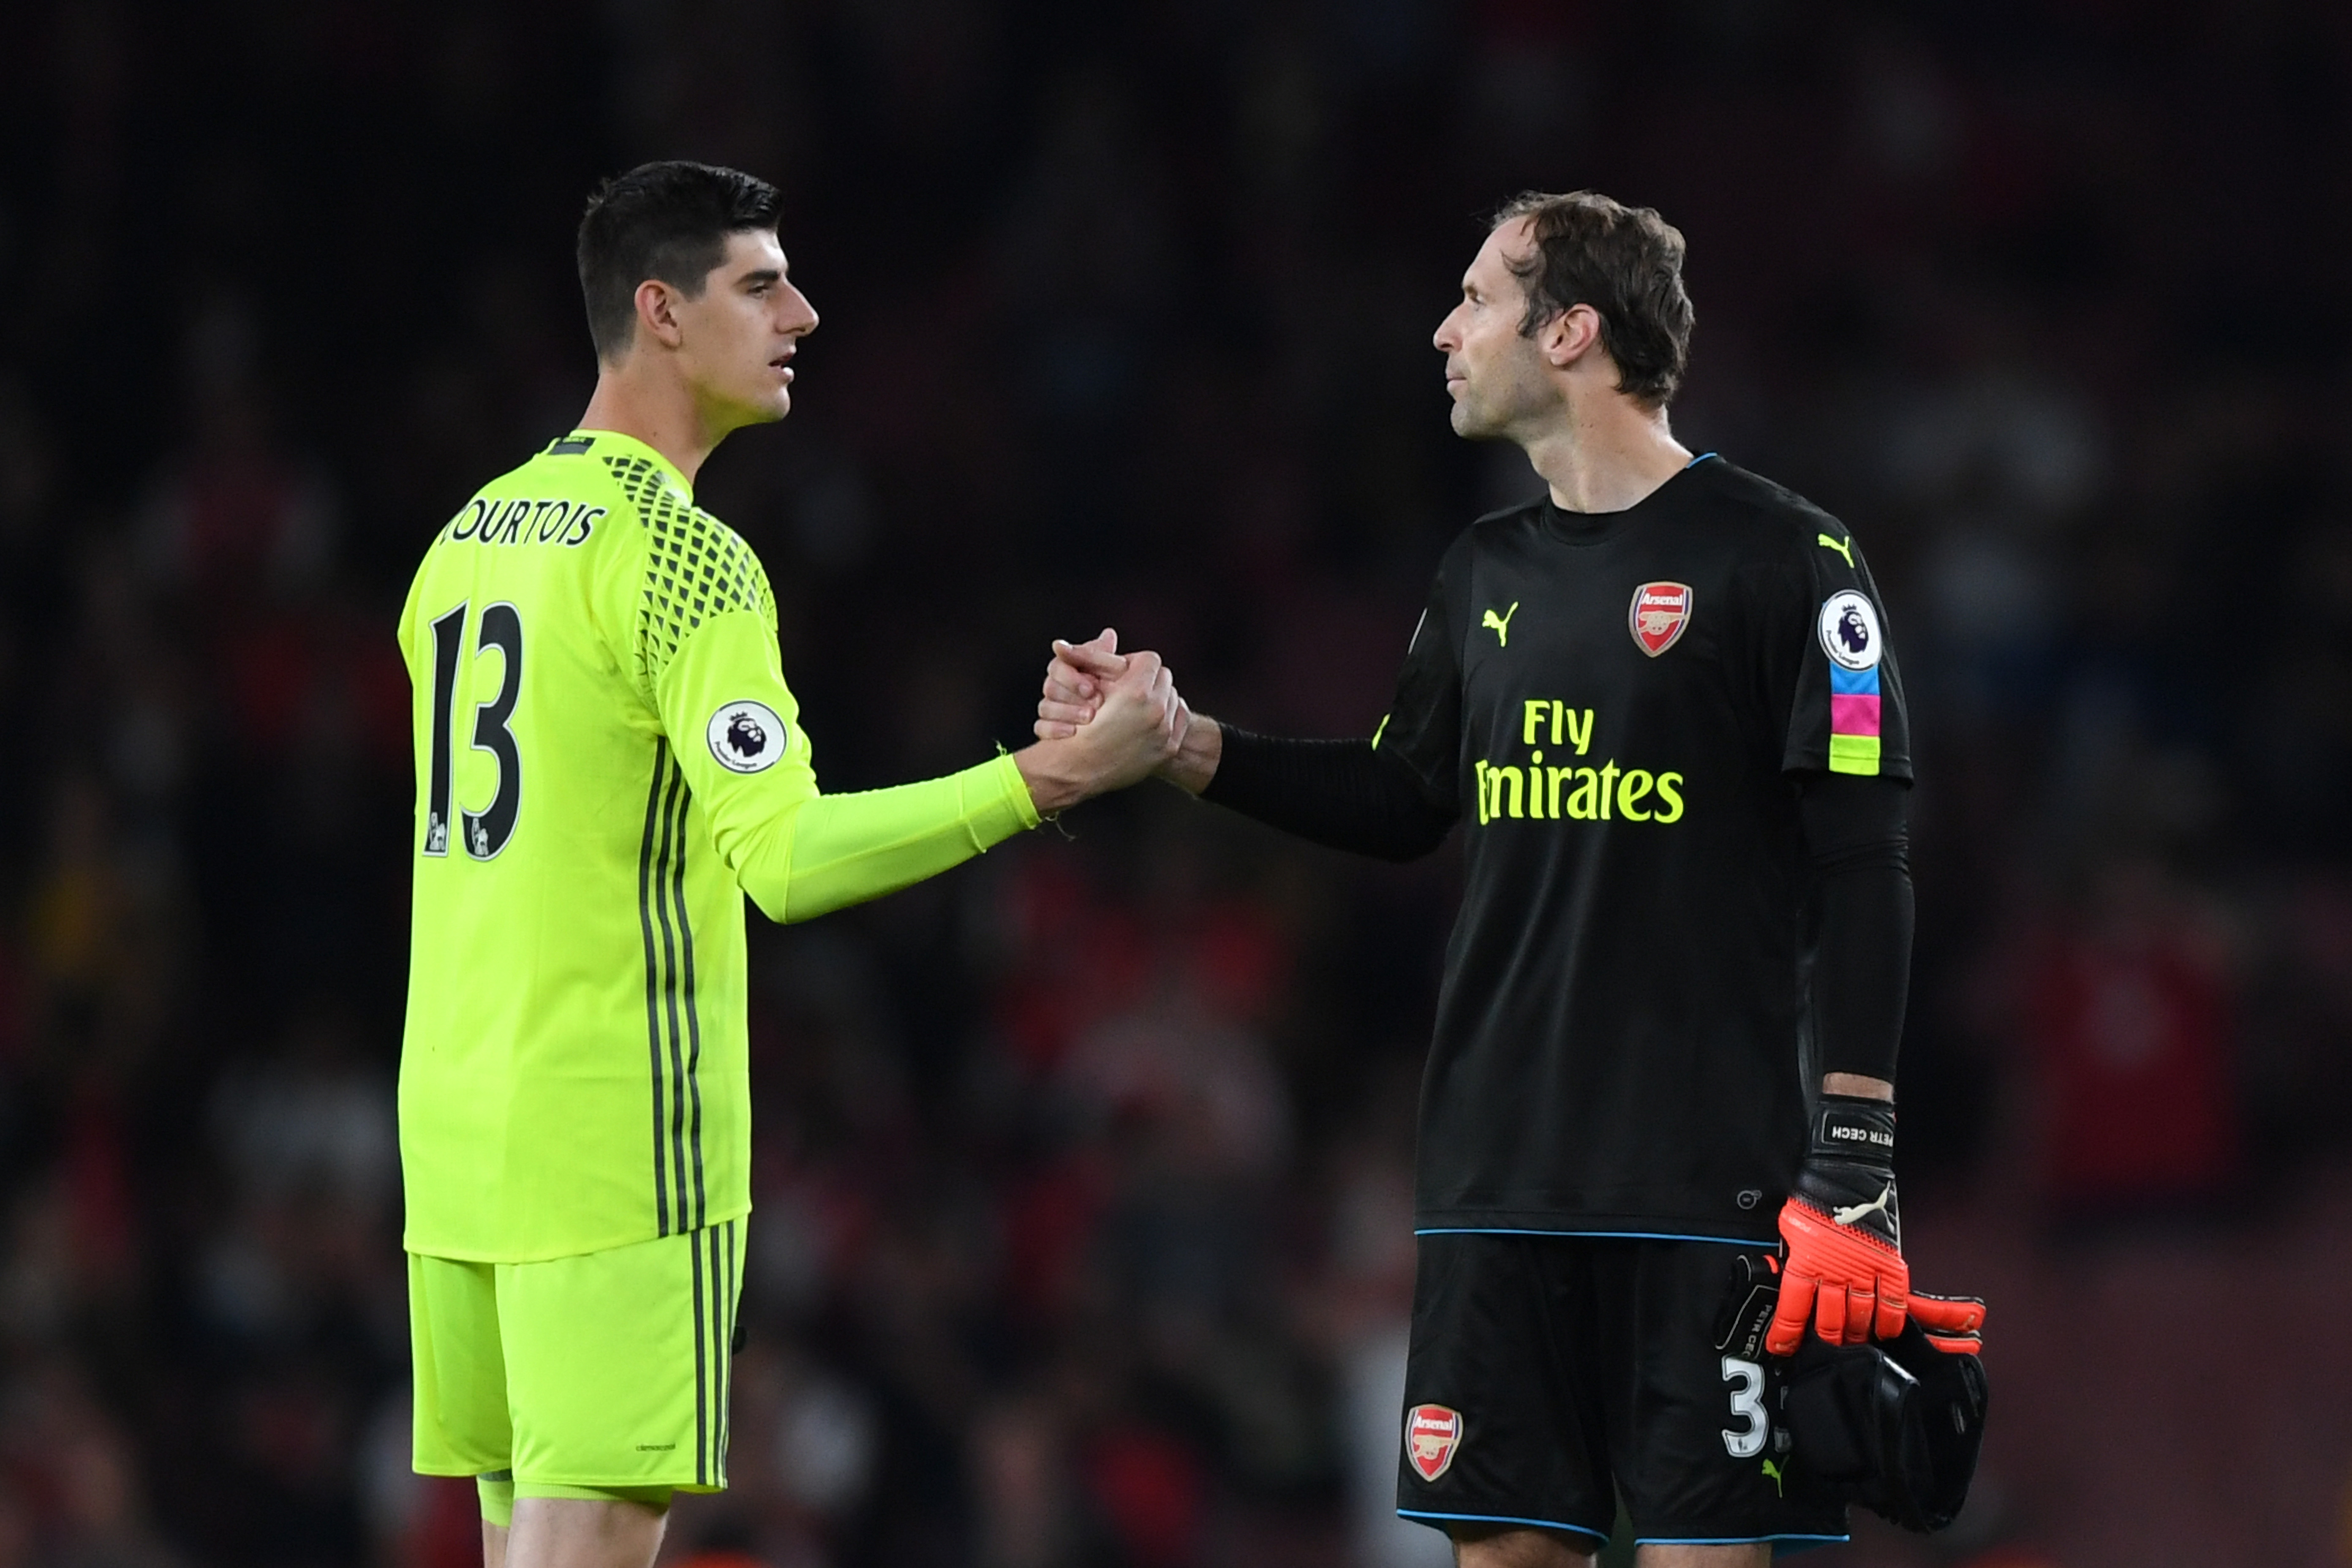 LONDON, ENGLAND - SEPTEMBER 24:  Thibaut Courtois of Chelsea (L) and Petr Cech of Arsenal (R) shake hands after the final whistle during the Premier League match between Arsenal and Chelsea at the Emirates Stadium on September 24, 2016 in London, England.  (Photo by Shaun Botterill/Getty Images)